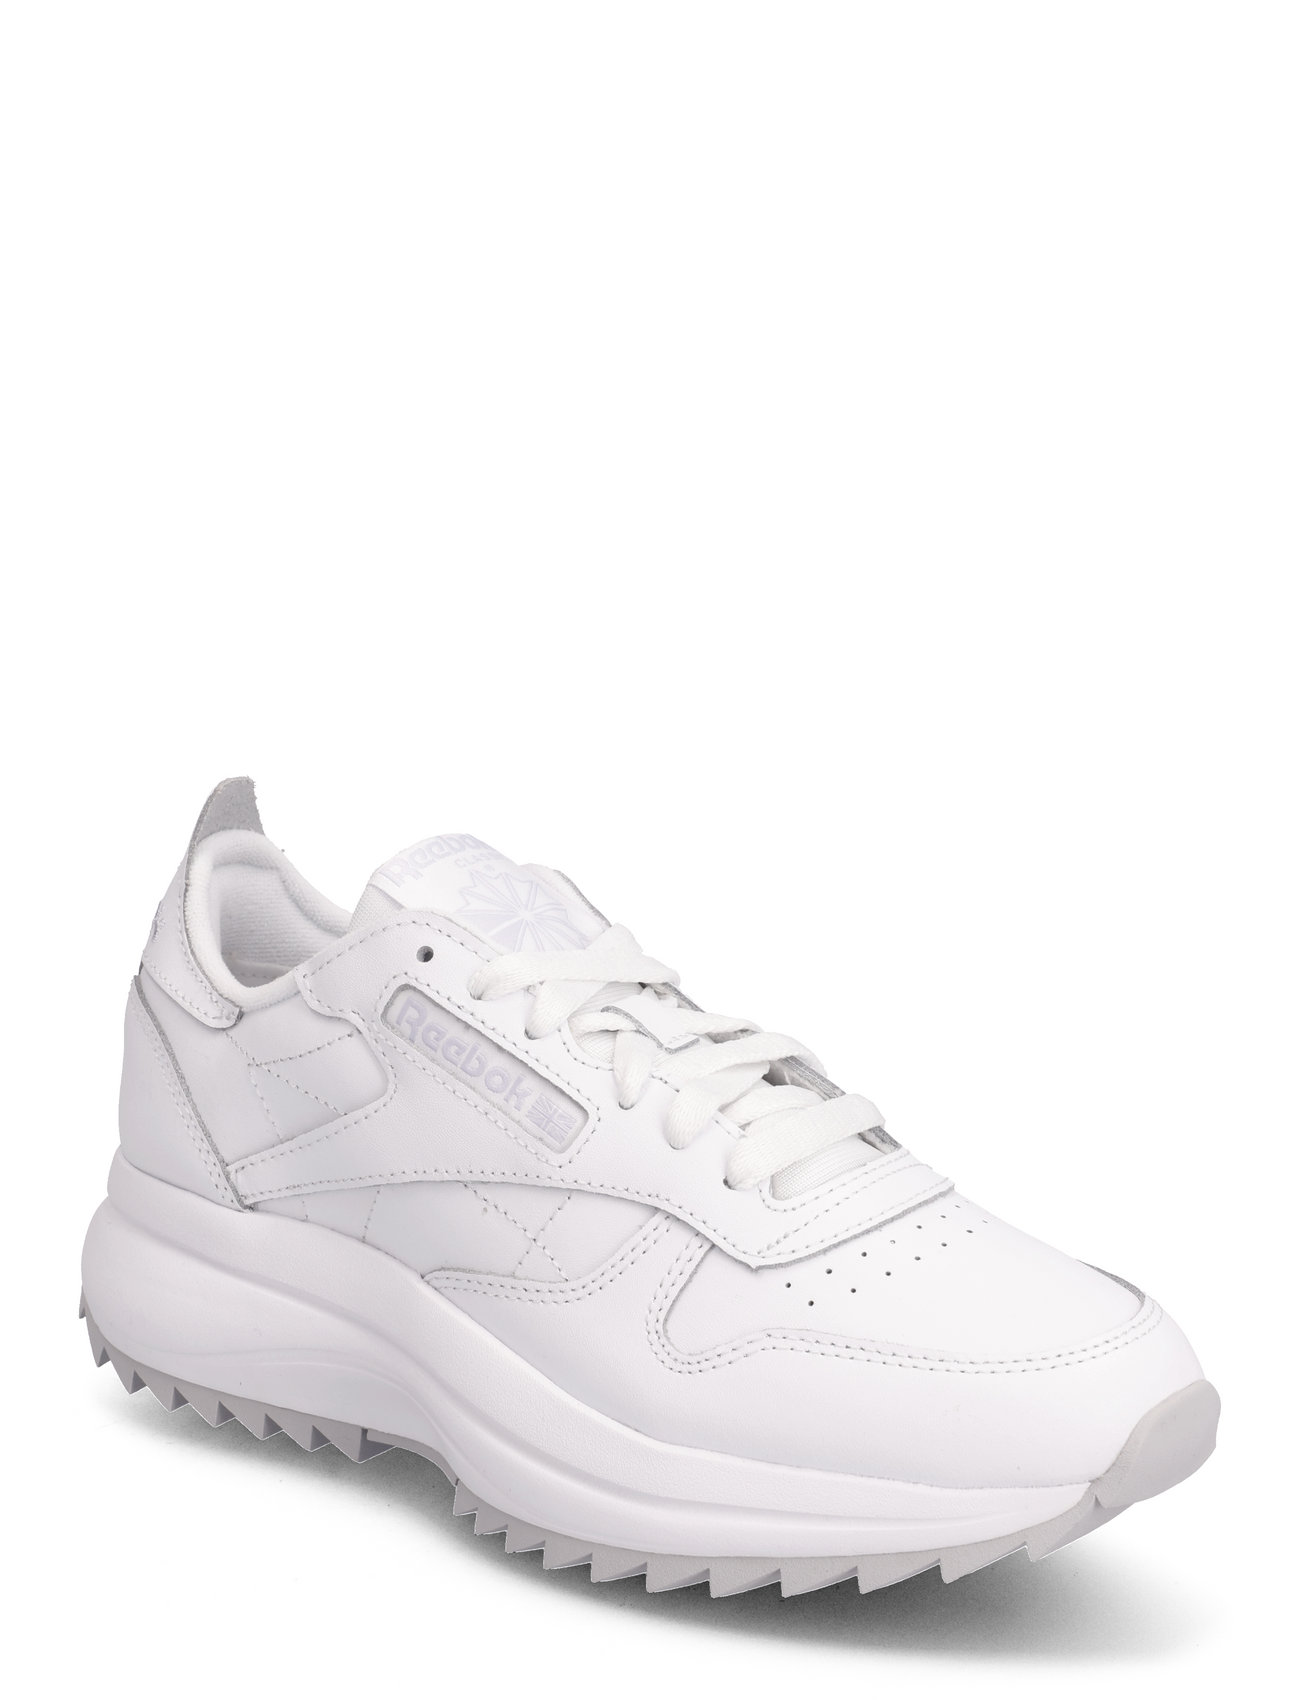 Reebok Classic Leather SP Extra Women's Shoes Sneakers 11, 59% OFF